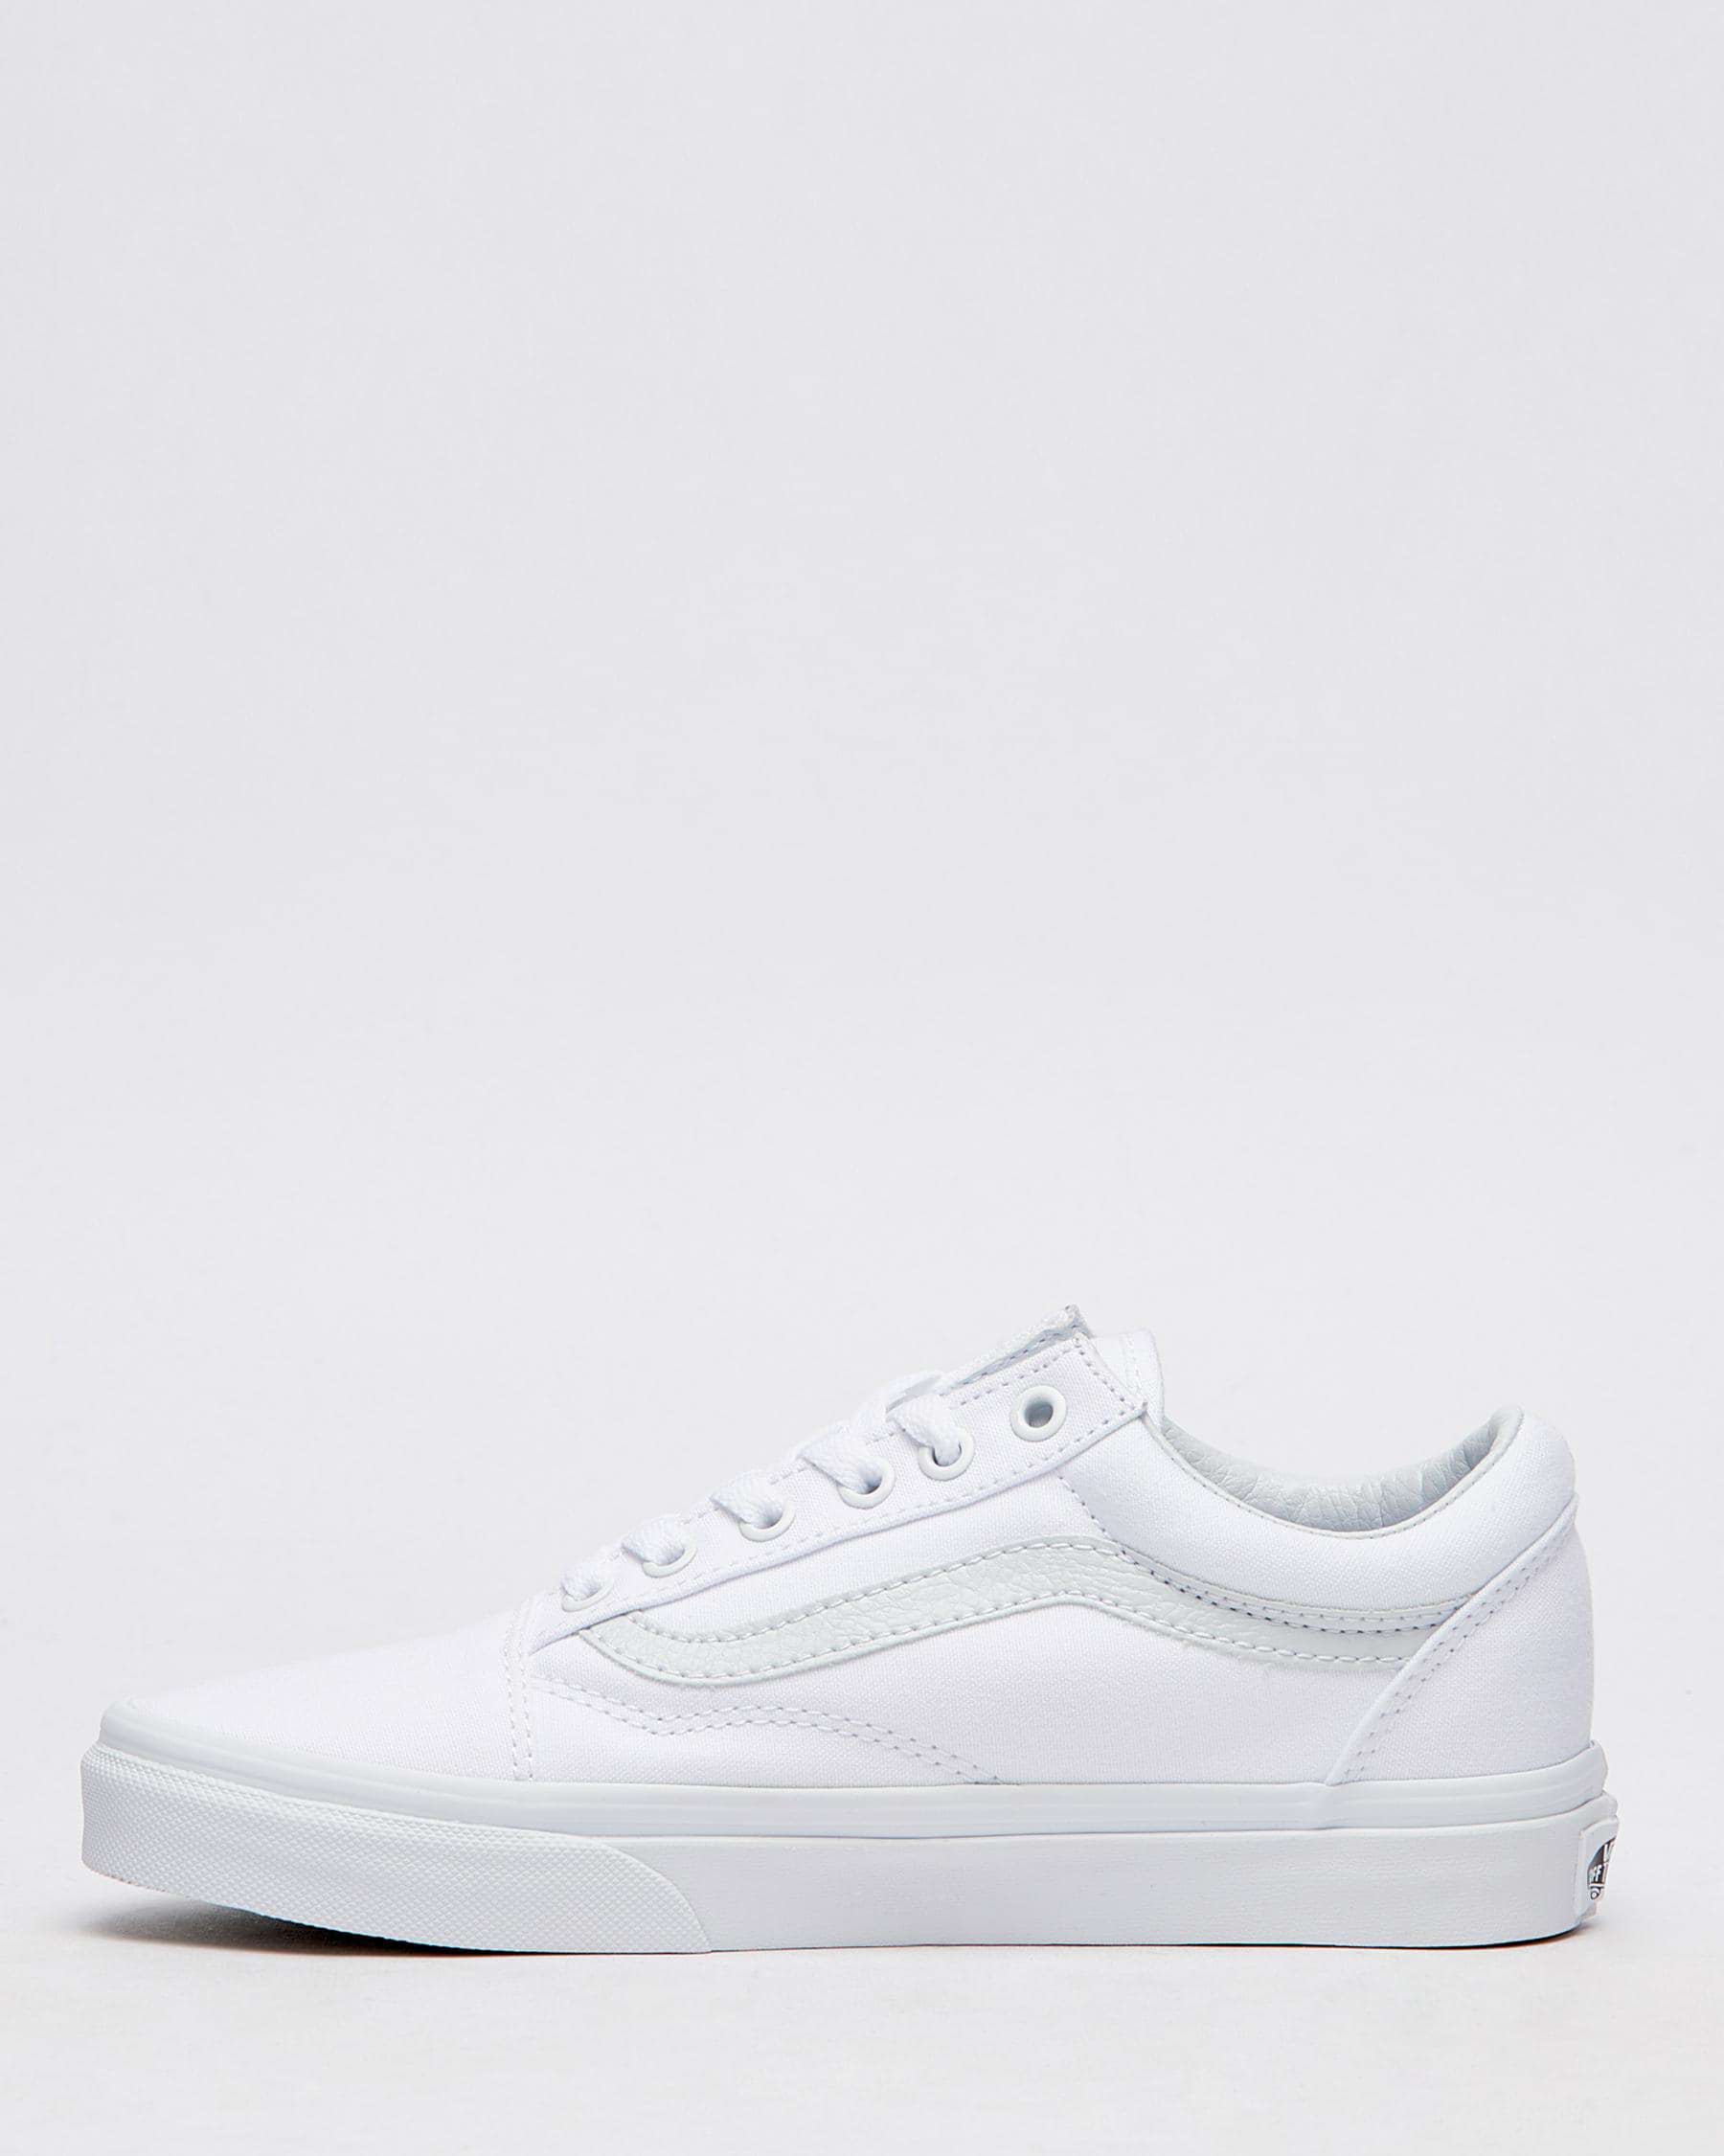 Vans Womens Old Skool Shoes In True White - Fast Shipping & Easy ...